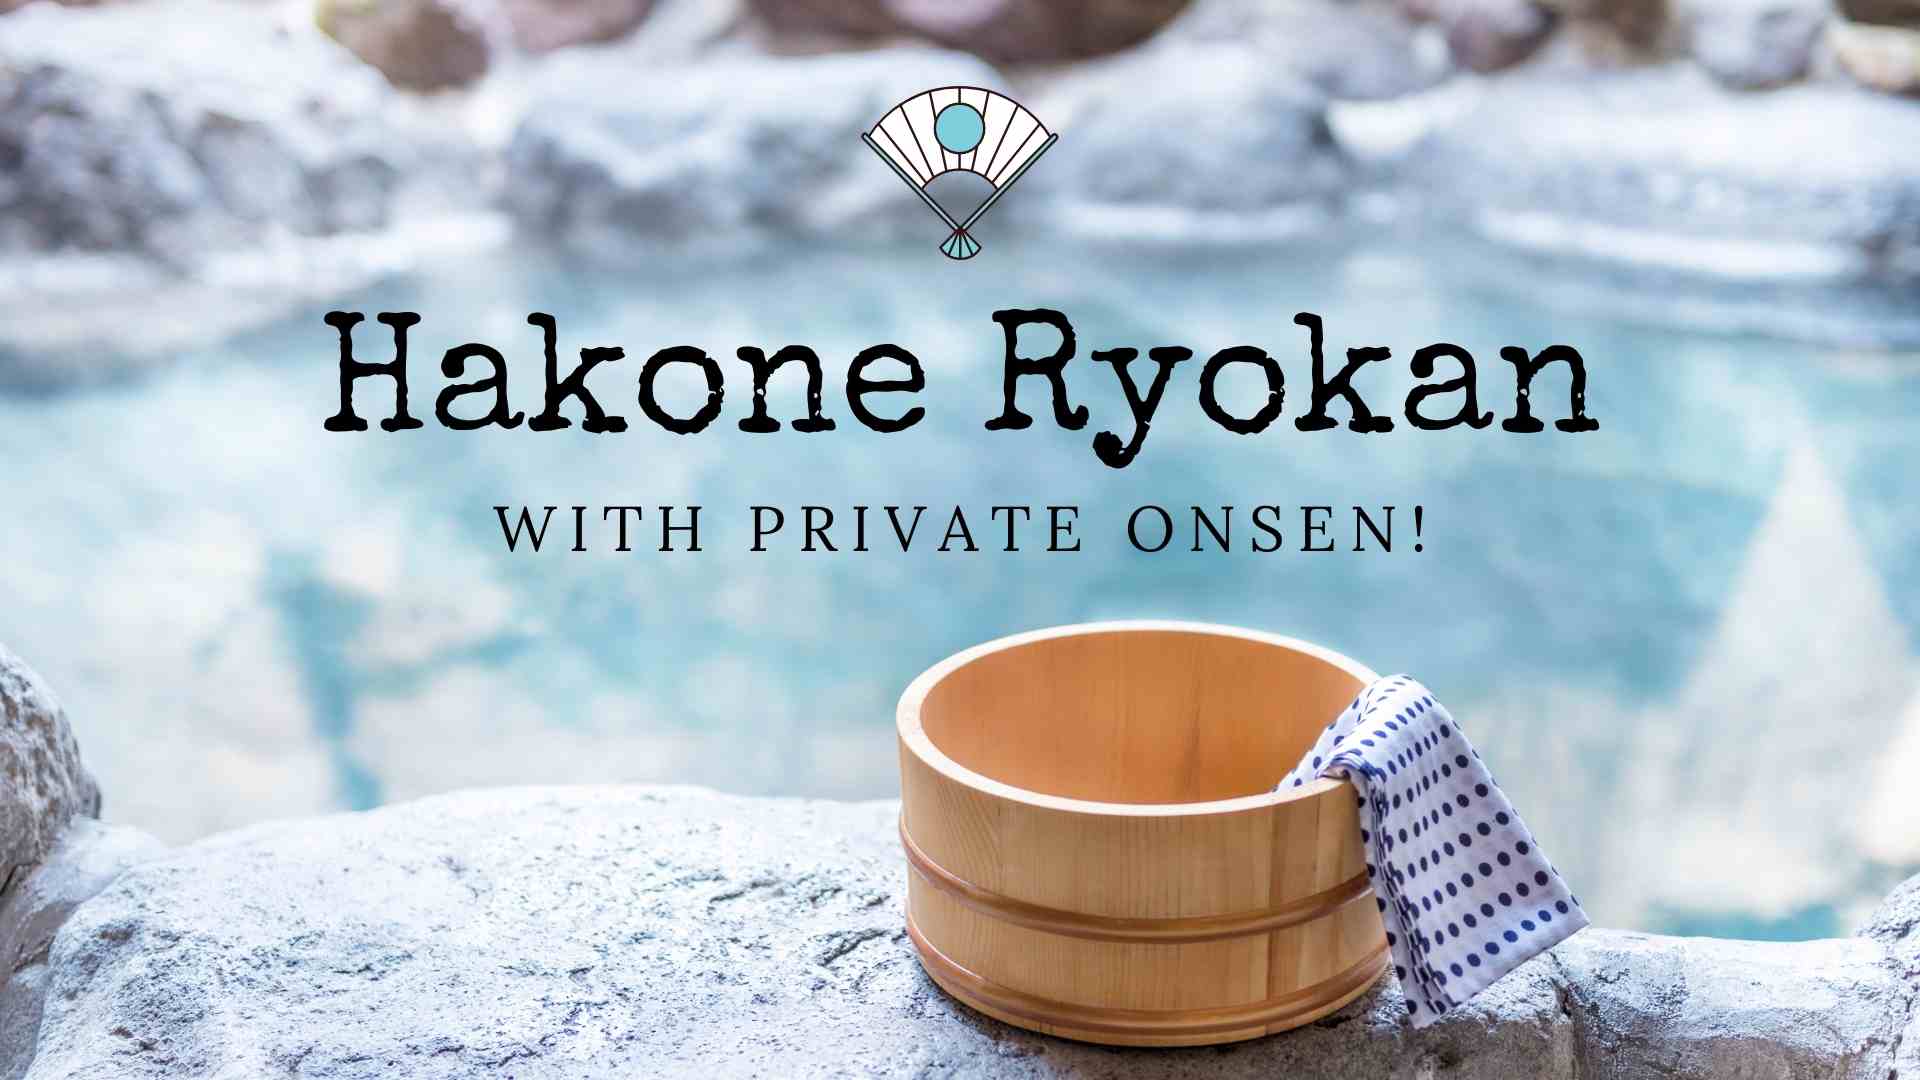 Hakone ryokan with private onsen, onsen in Hakone, best hakone ryokan with onsen